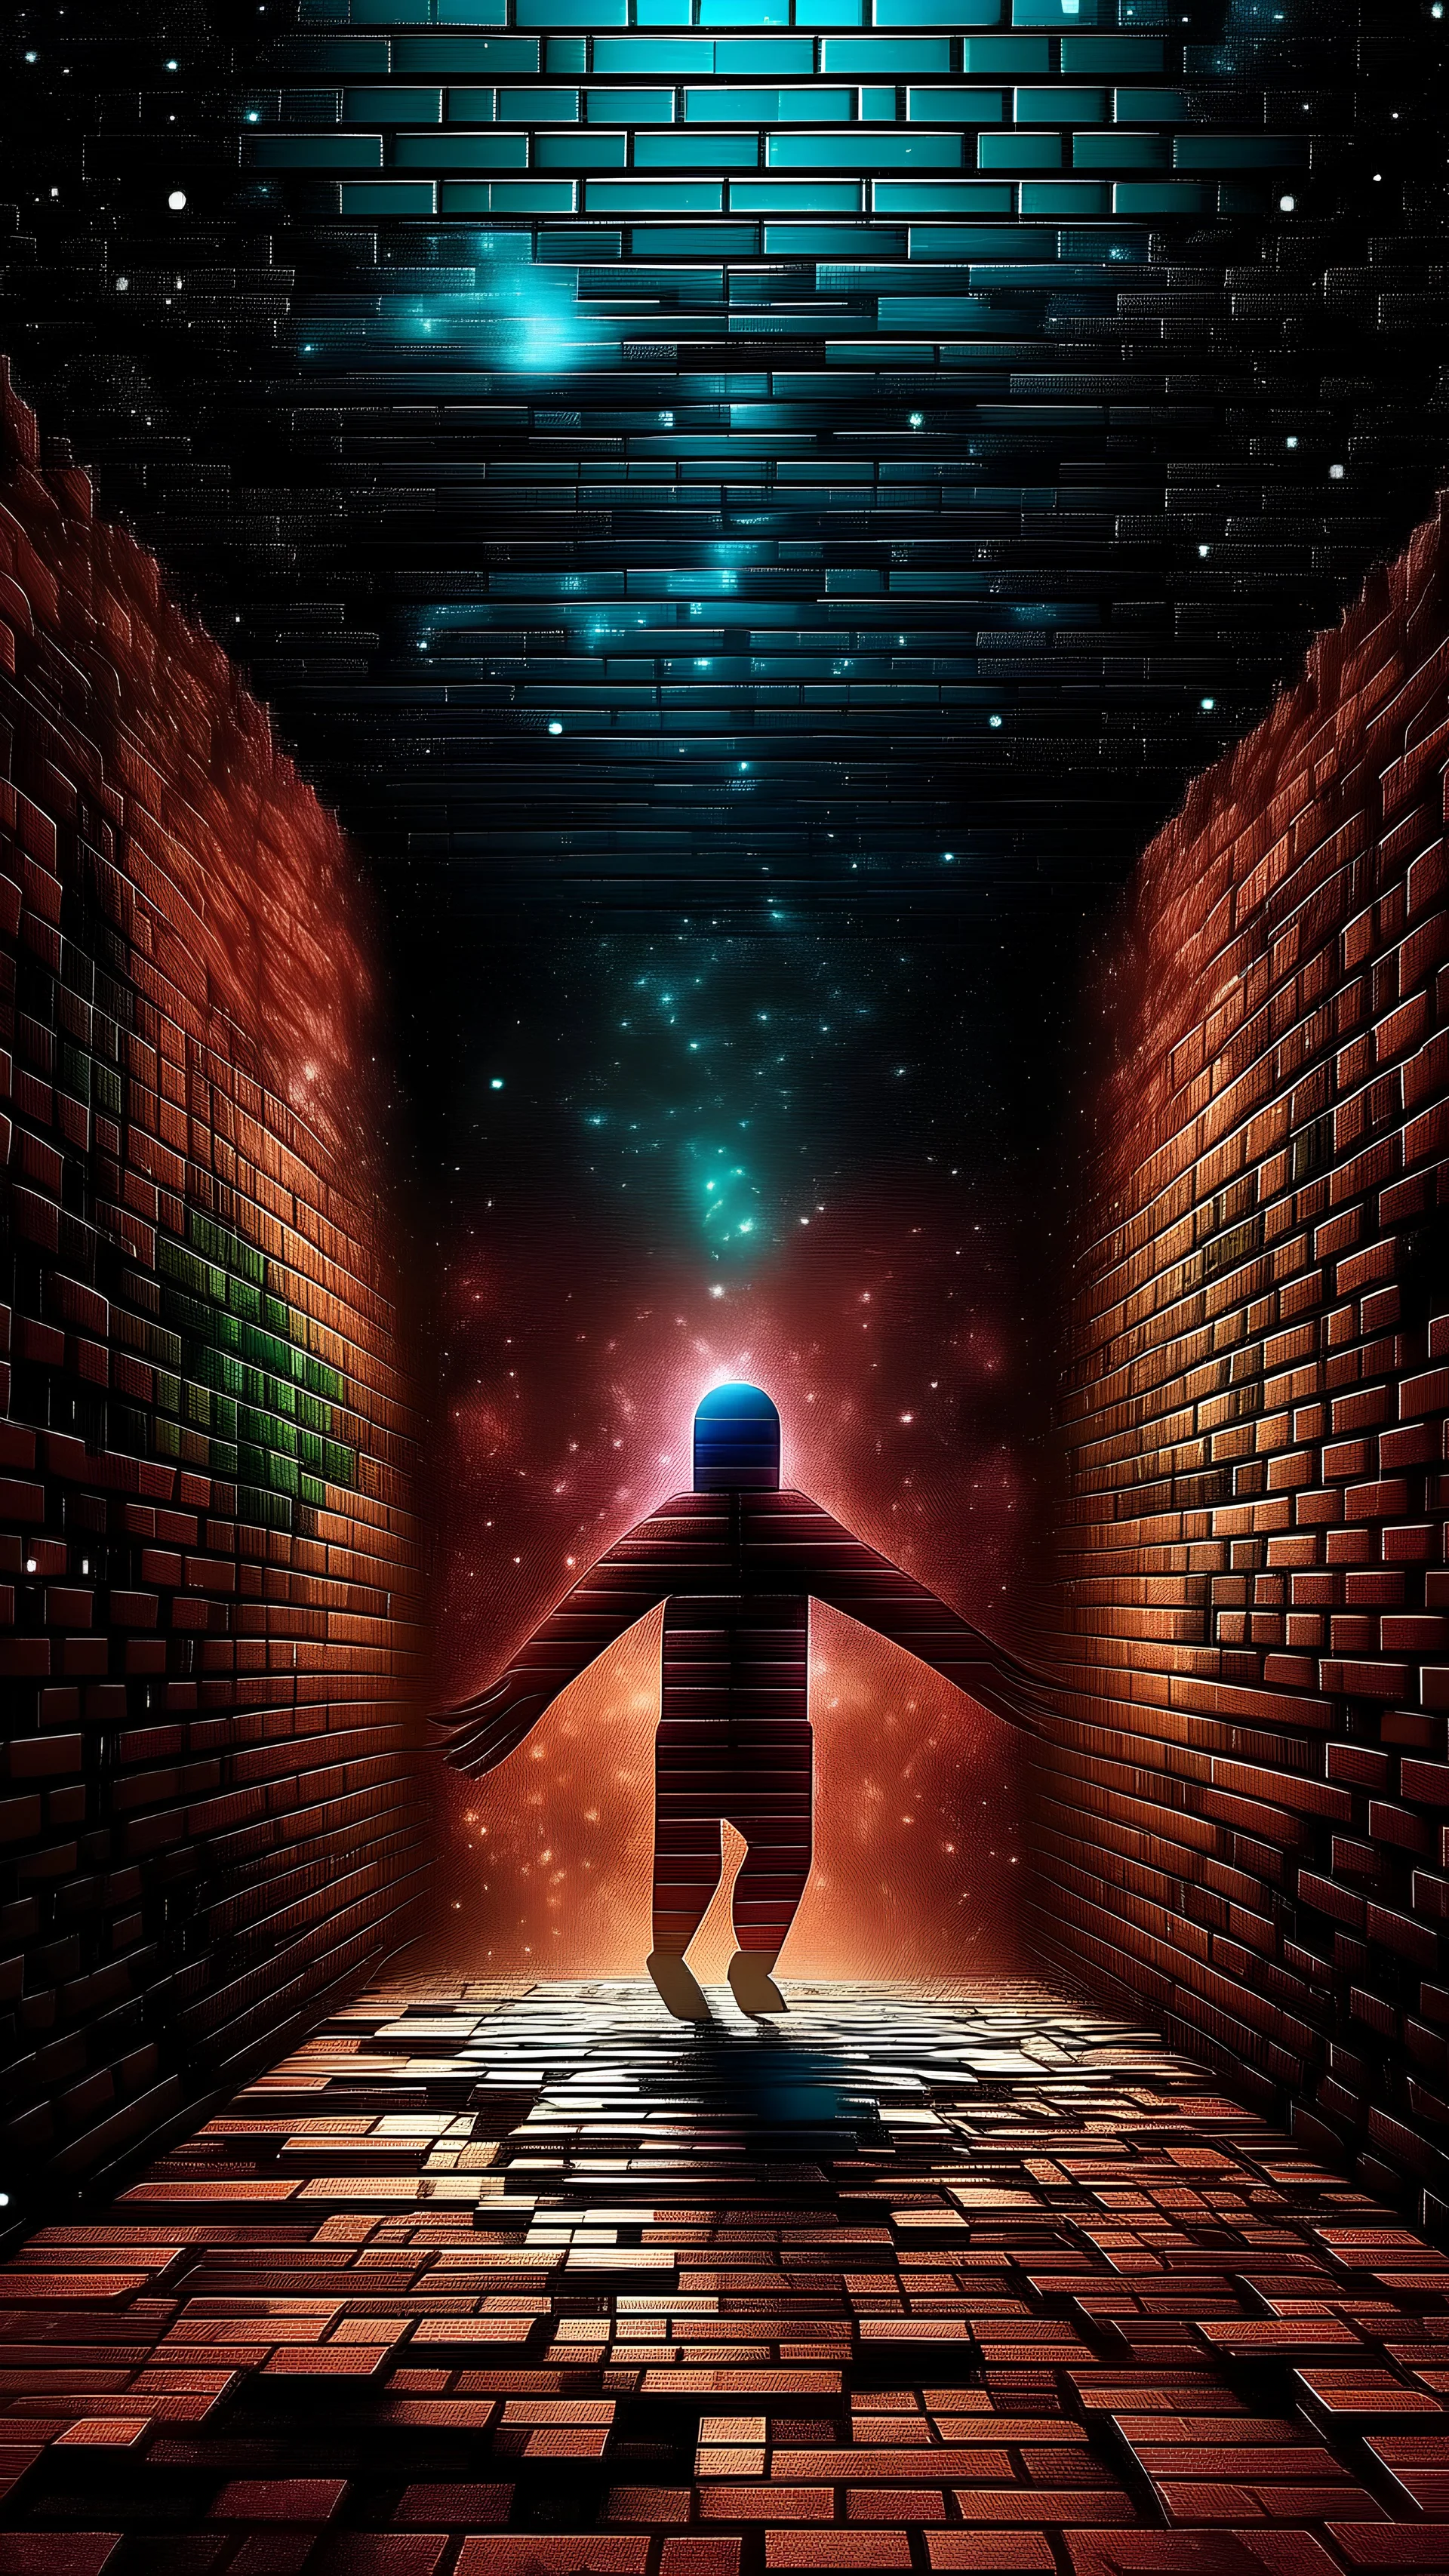 cosmic being is coming through a brick wall